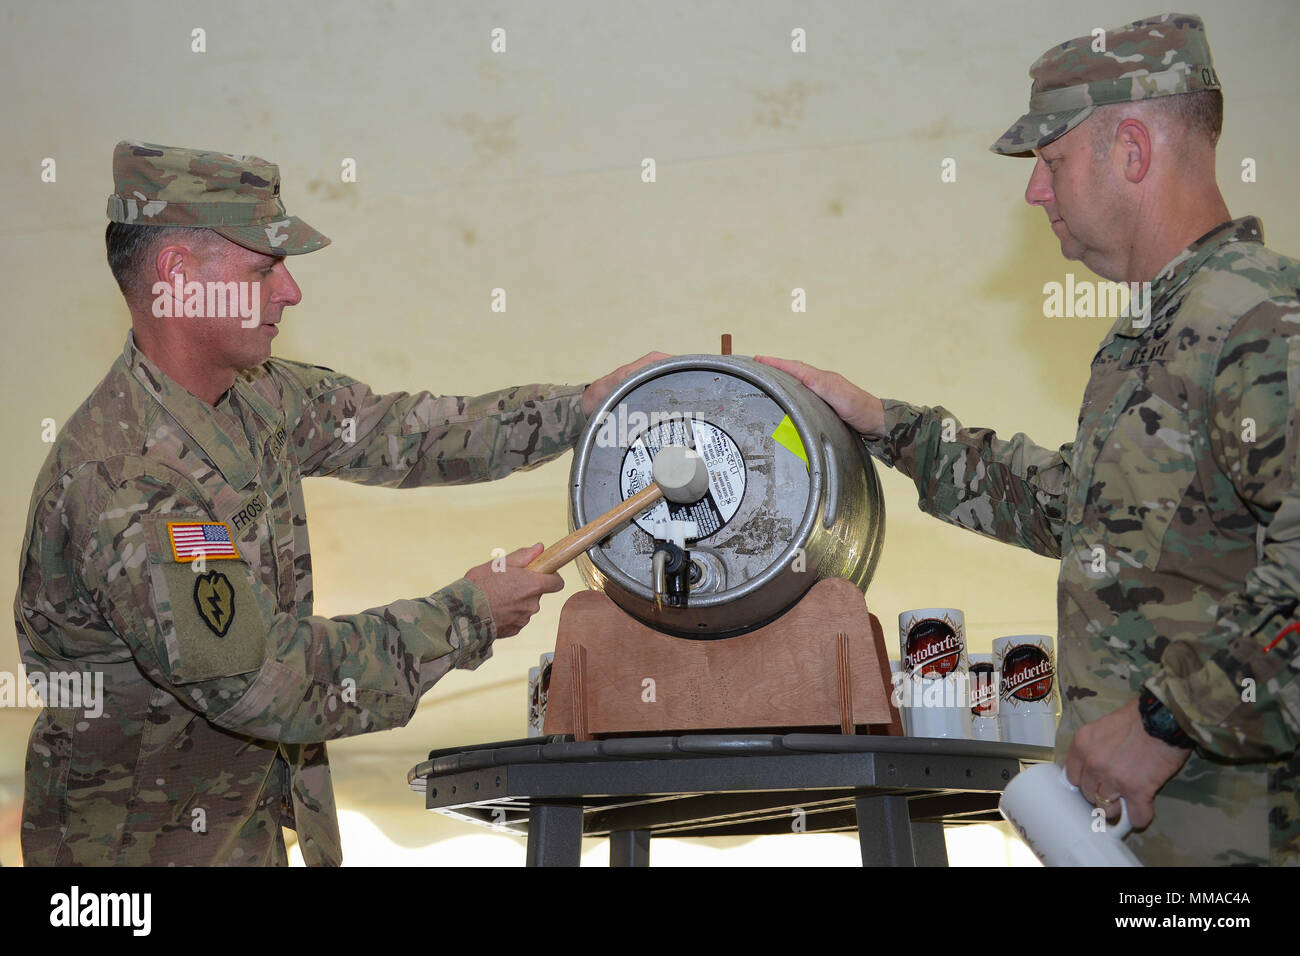 From left, U.S. Army Maj. Gen. Malcolm B. Frost, Center for Initial Military Training commanding general, and Col. Ralph L. Clayton III, 733rd Mission Support Group commander, tap the keg to officially start the Oktoberfest celebration at Joint Base Langley-Eustis, Va., Sept. 22, 2017. The first Oktoberfest was held in 1810 in Munich, Germany, to honor the marriage between Prince Ludwig and Therese of Saxe-Hildburghausen. (U.S. Air Force photo by Airman 1st Class Kaylee Dubois) Stock Photo